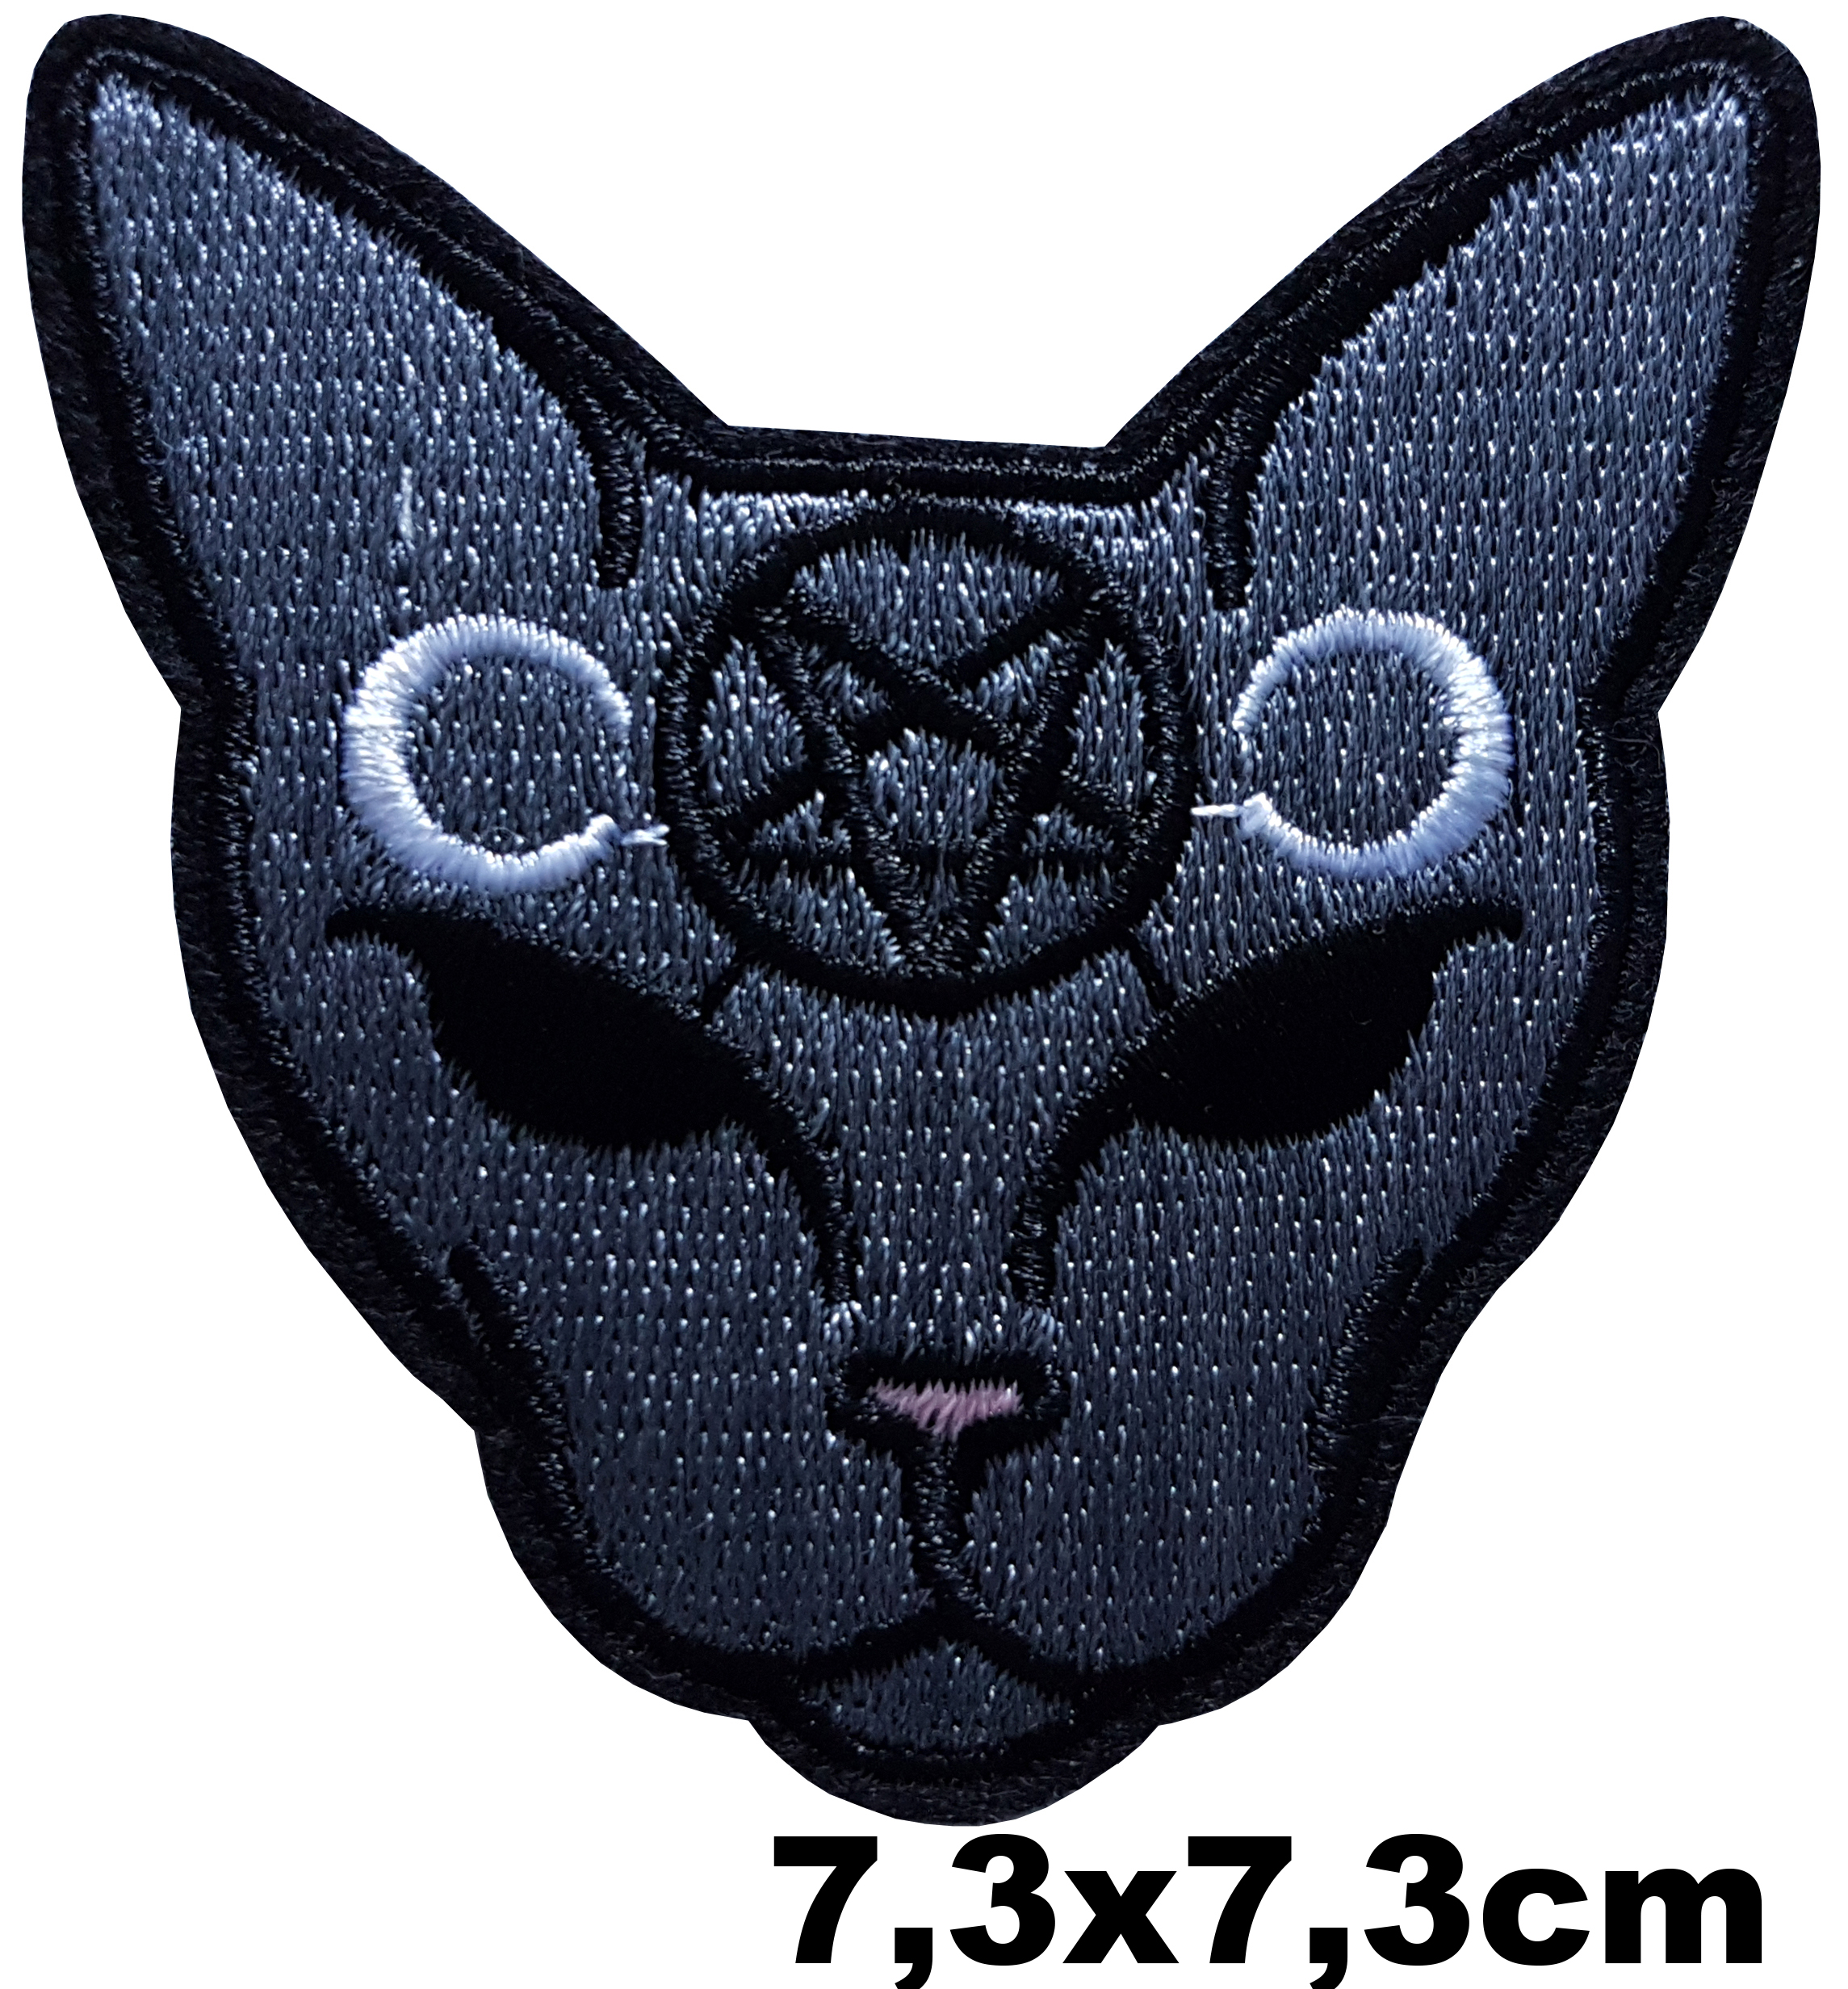 Patch Thermocollant Chat Égyptien Pentagramme